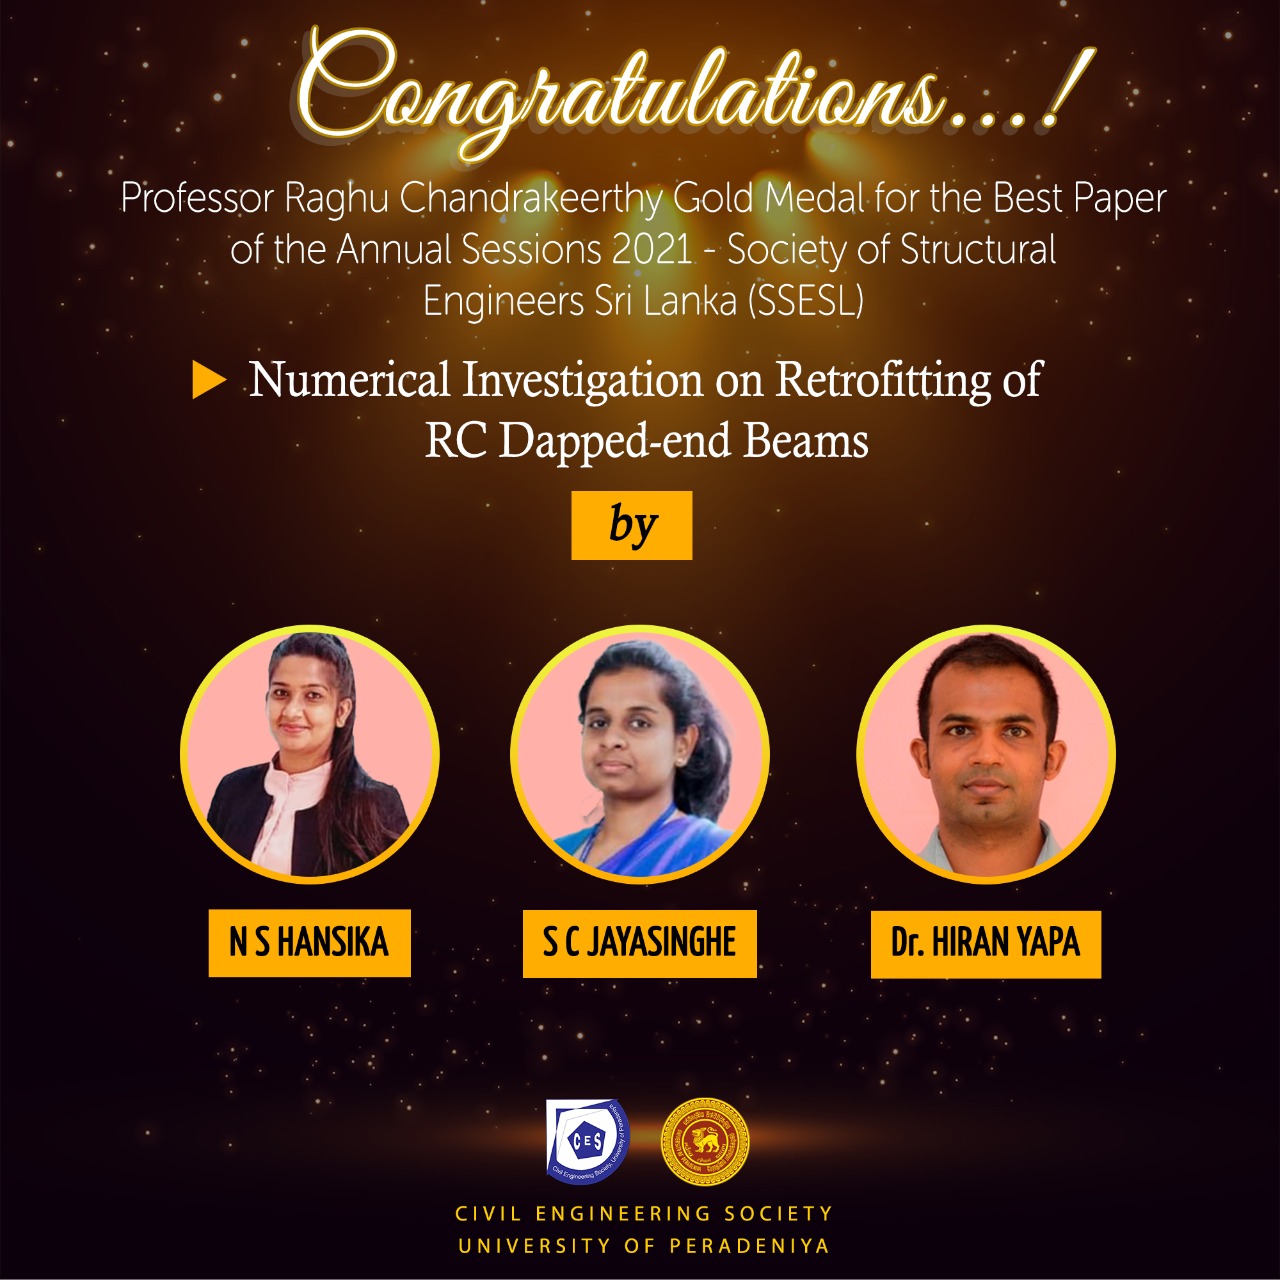 Ms. S.C. Jayasinghe, Ms. P.K.N.S. Hansika and Dr. H.D. Yapa has won the Professor Chandrakeerthy Award for the “Best Paper” presented at the Annual Sessions 2021